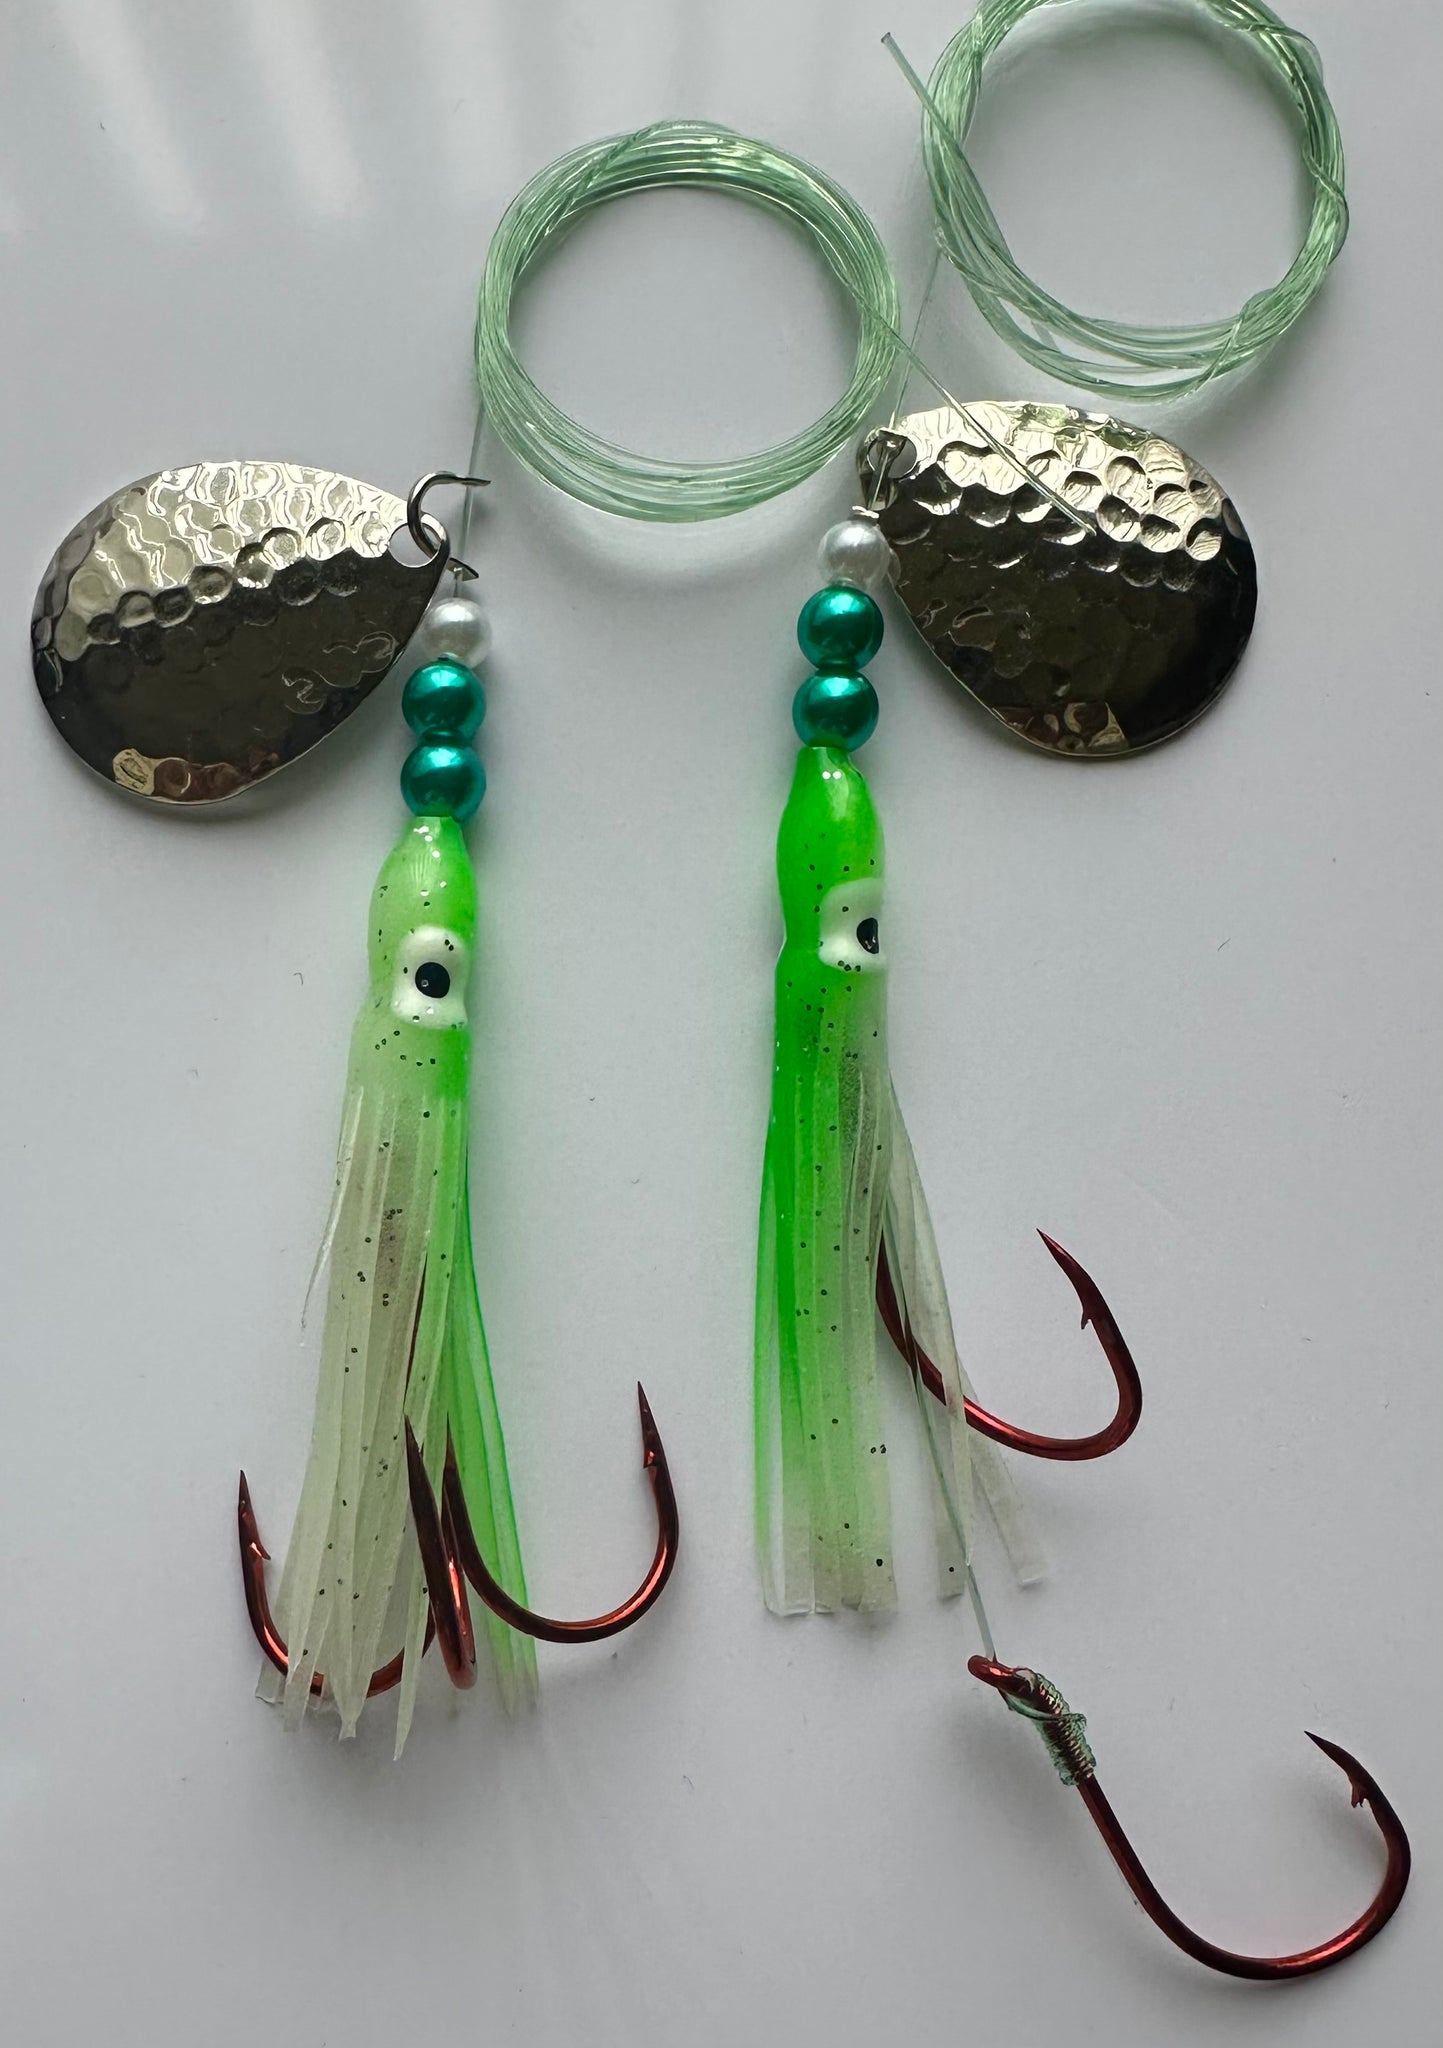 Salmon Tackle - Twin Pack Green and White #5 Salmon Hoochie's 1) Tied on a 2/0 Red Treble and the other tied on a 4/0 Red Octopus Snell Rig on 40 Lb Test Trilene with a Hammered Nickel Colorado Spinner Blade